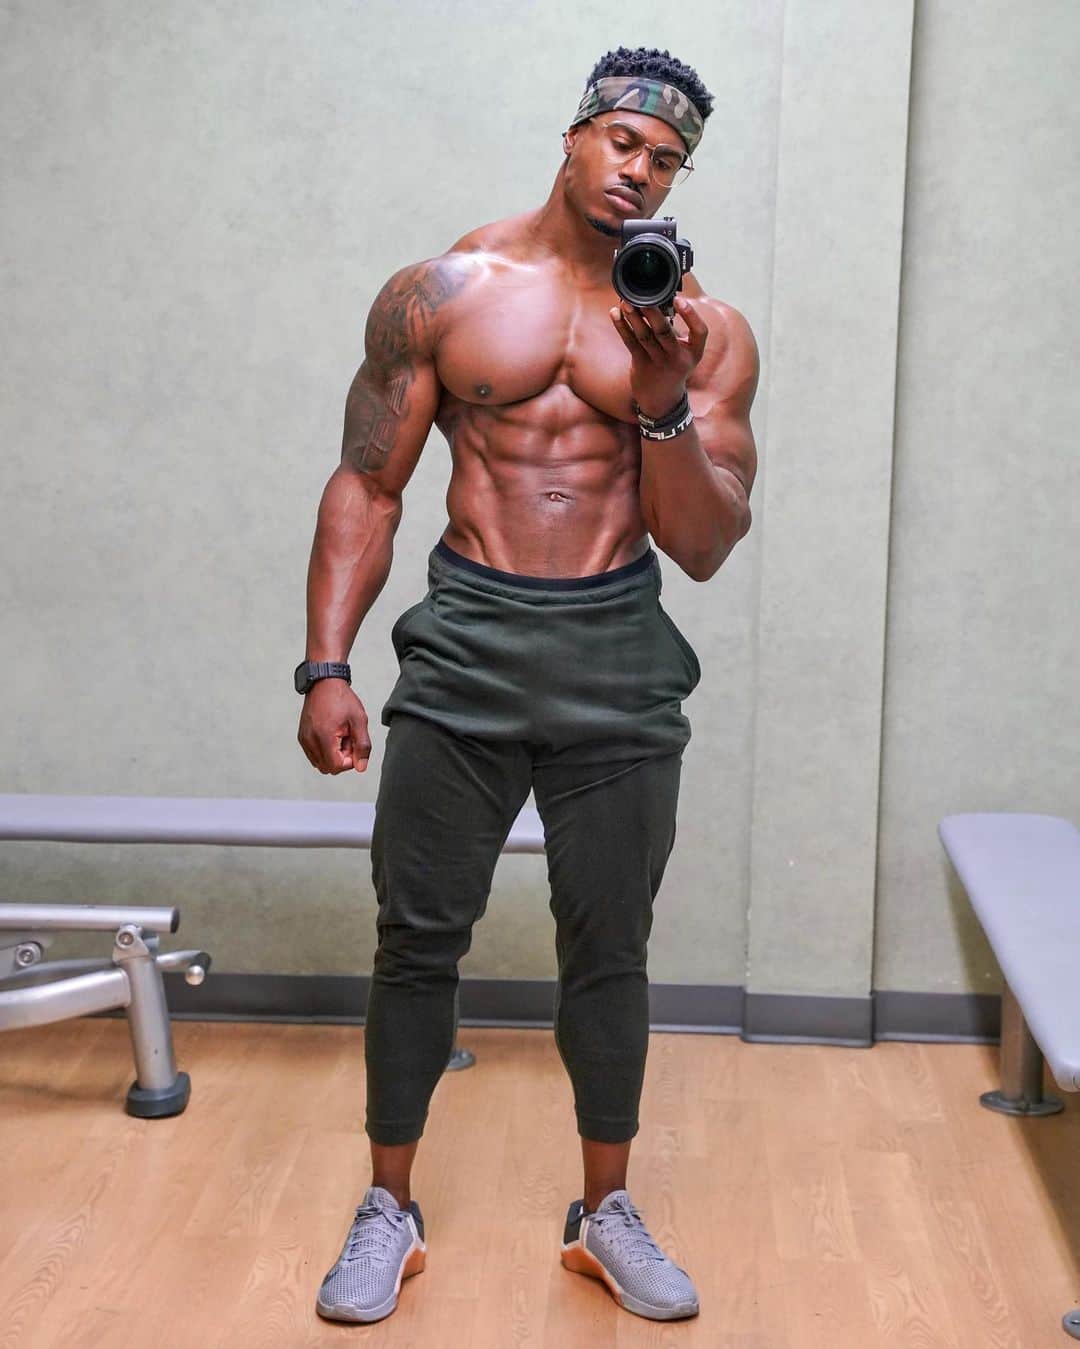 Simeon Pandaのインスタグラム：「Who’s ready to get busy today? 🔥 Got arms, then going ham on cardio, 1hr minimum 🔥🔥🔥⁣ ⁣ 🏠 I want to help you train AT HOME! ⁣ Visit my YouTube Channel: ⁣ YouTube.com/simeonpanda⁣ Plenty of FREE home routines 👊🏾⁣ ⁣ 👉 You can download my training programs at simeonpanda.com⁣ ⁣ 💊 Follow @innosupps ⚡️ for the supplements I use👌🏾⁣⁣」